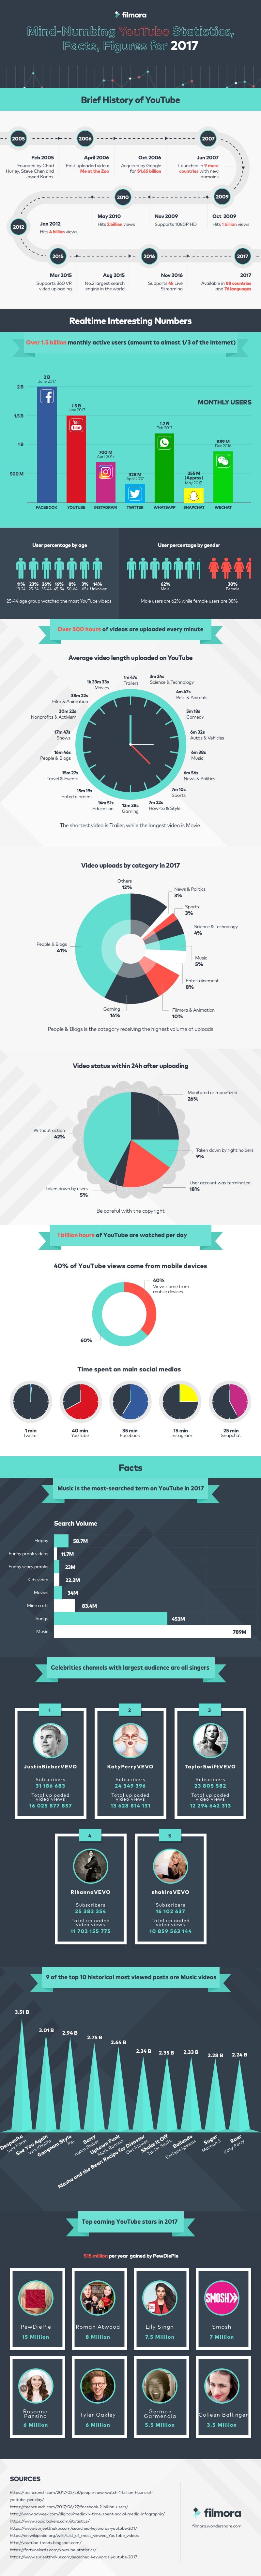 YouTube Statistics Facts 2017 Infographic